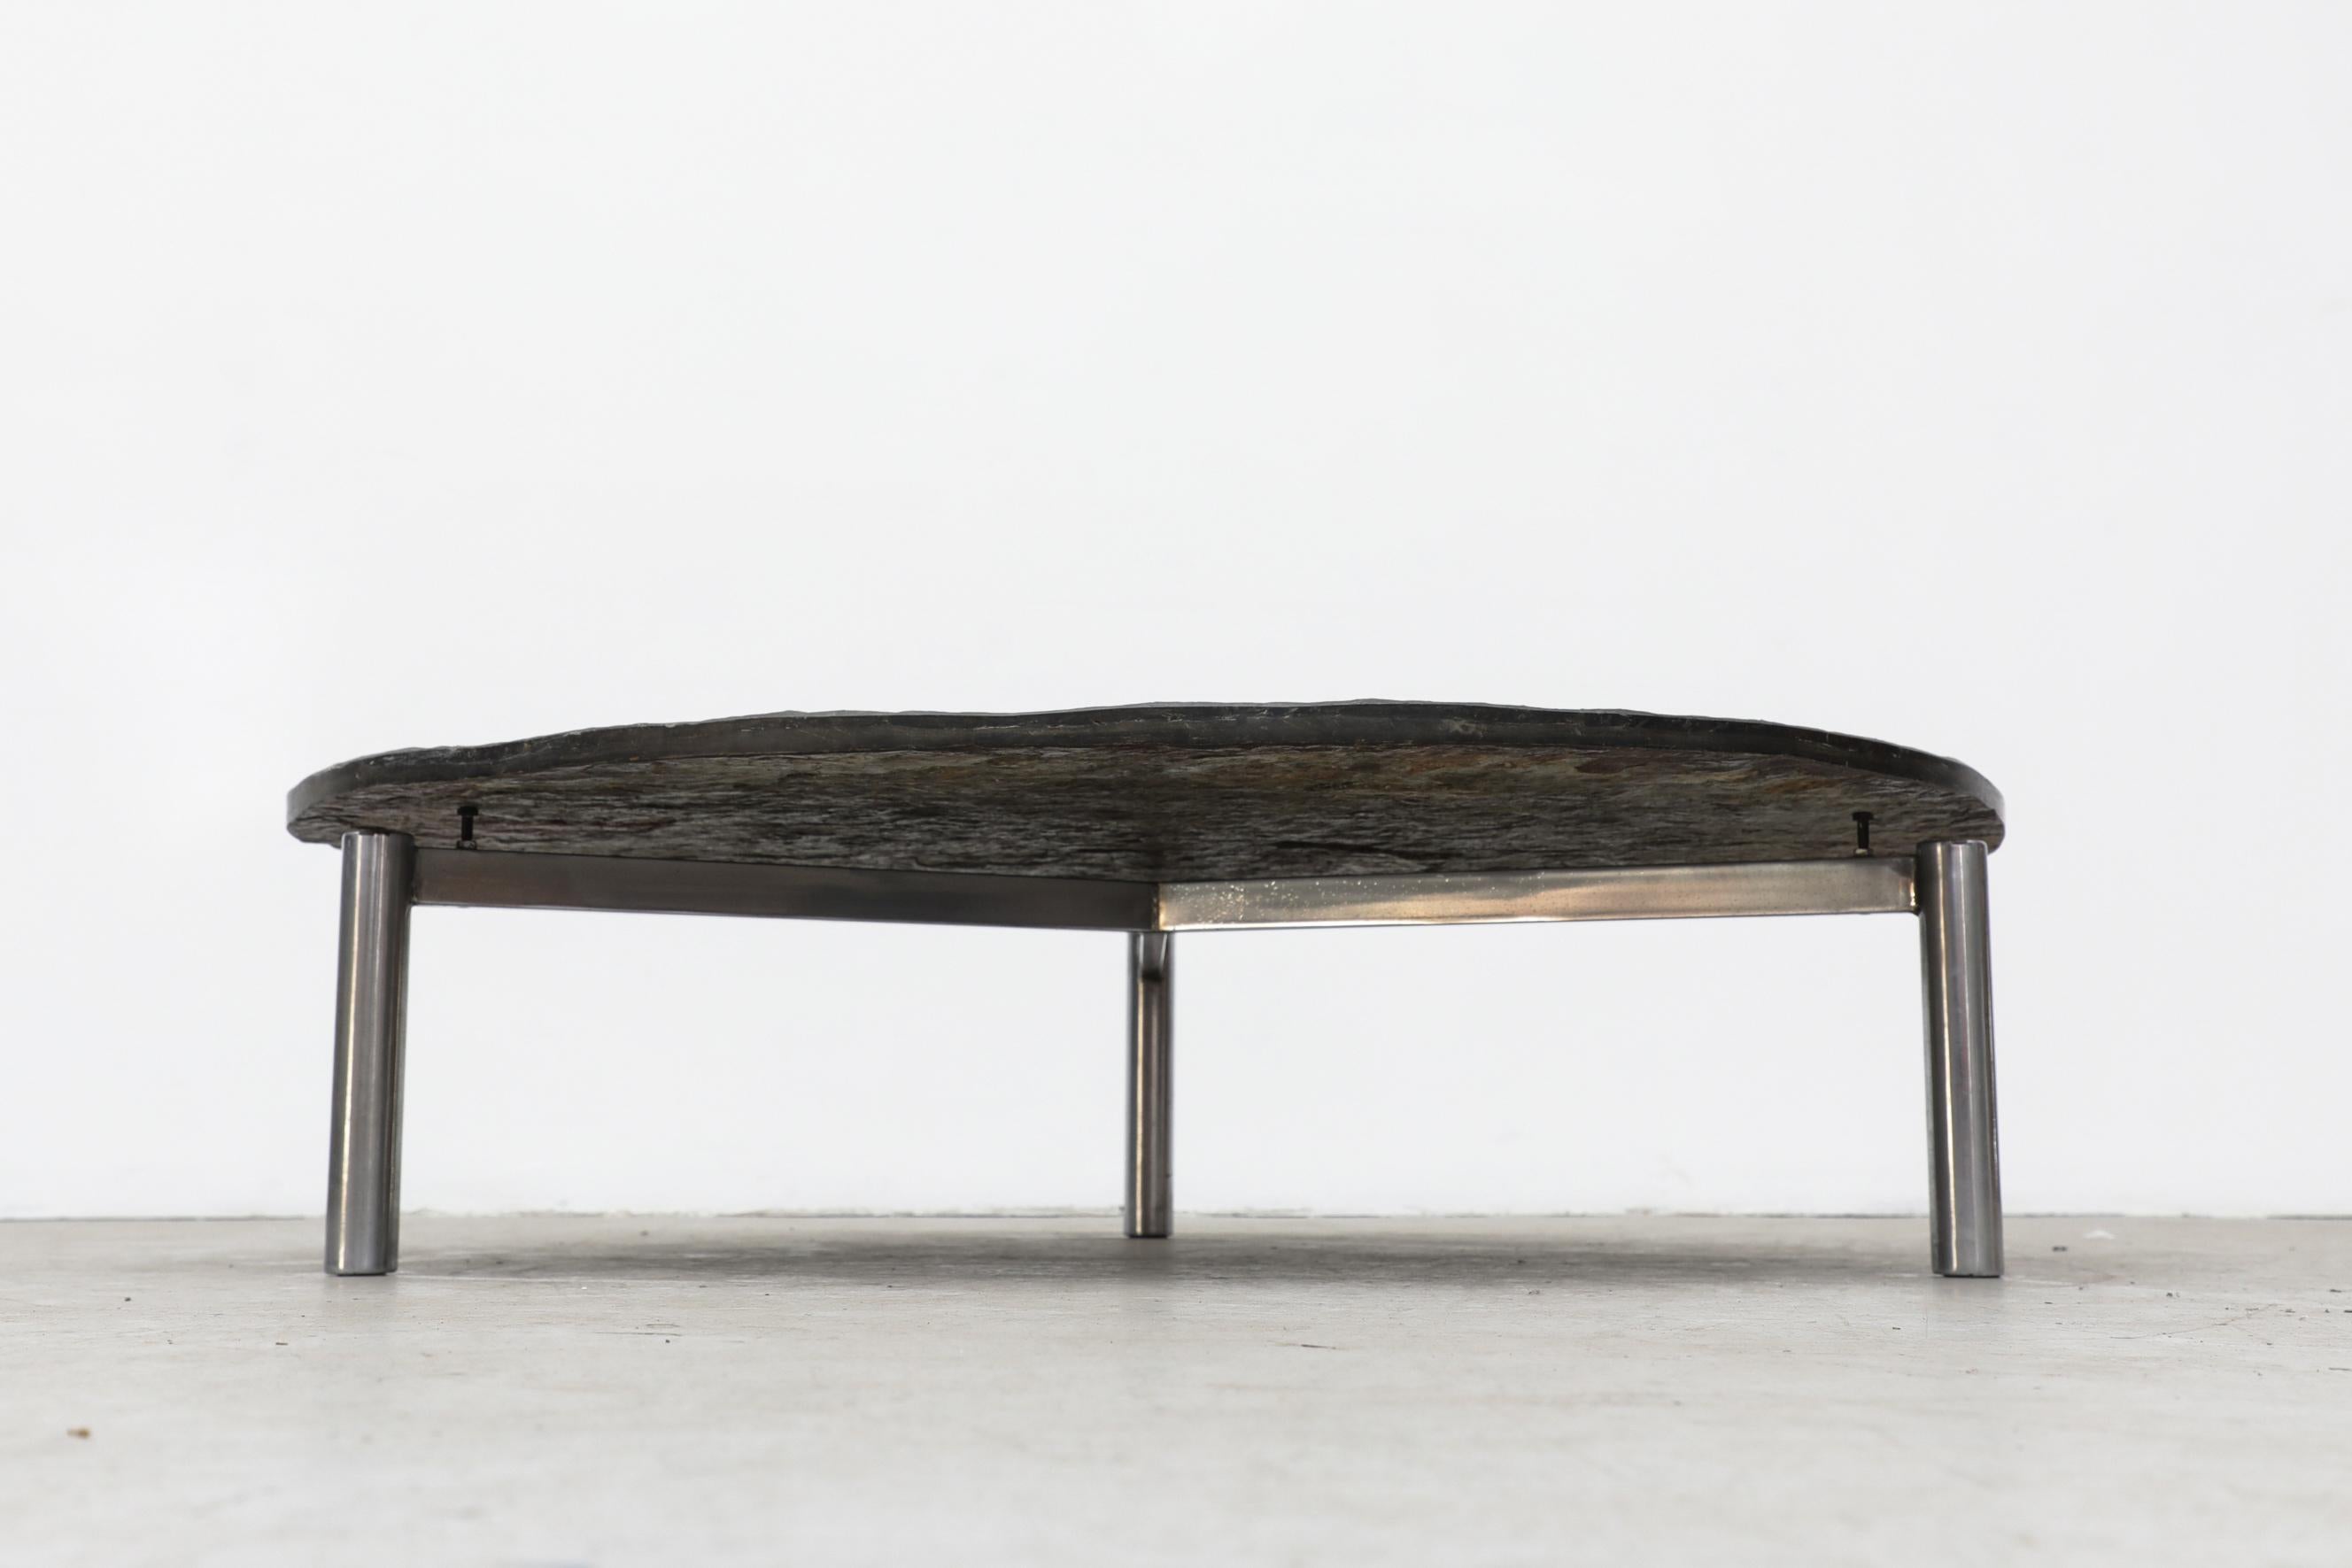 Late 20th Century Giant Poul Kjerholm Inspired Stone and Chrome Coffee Table